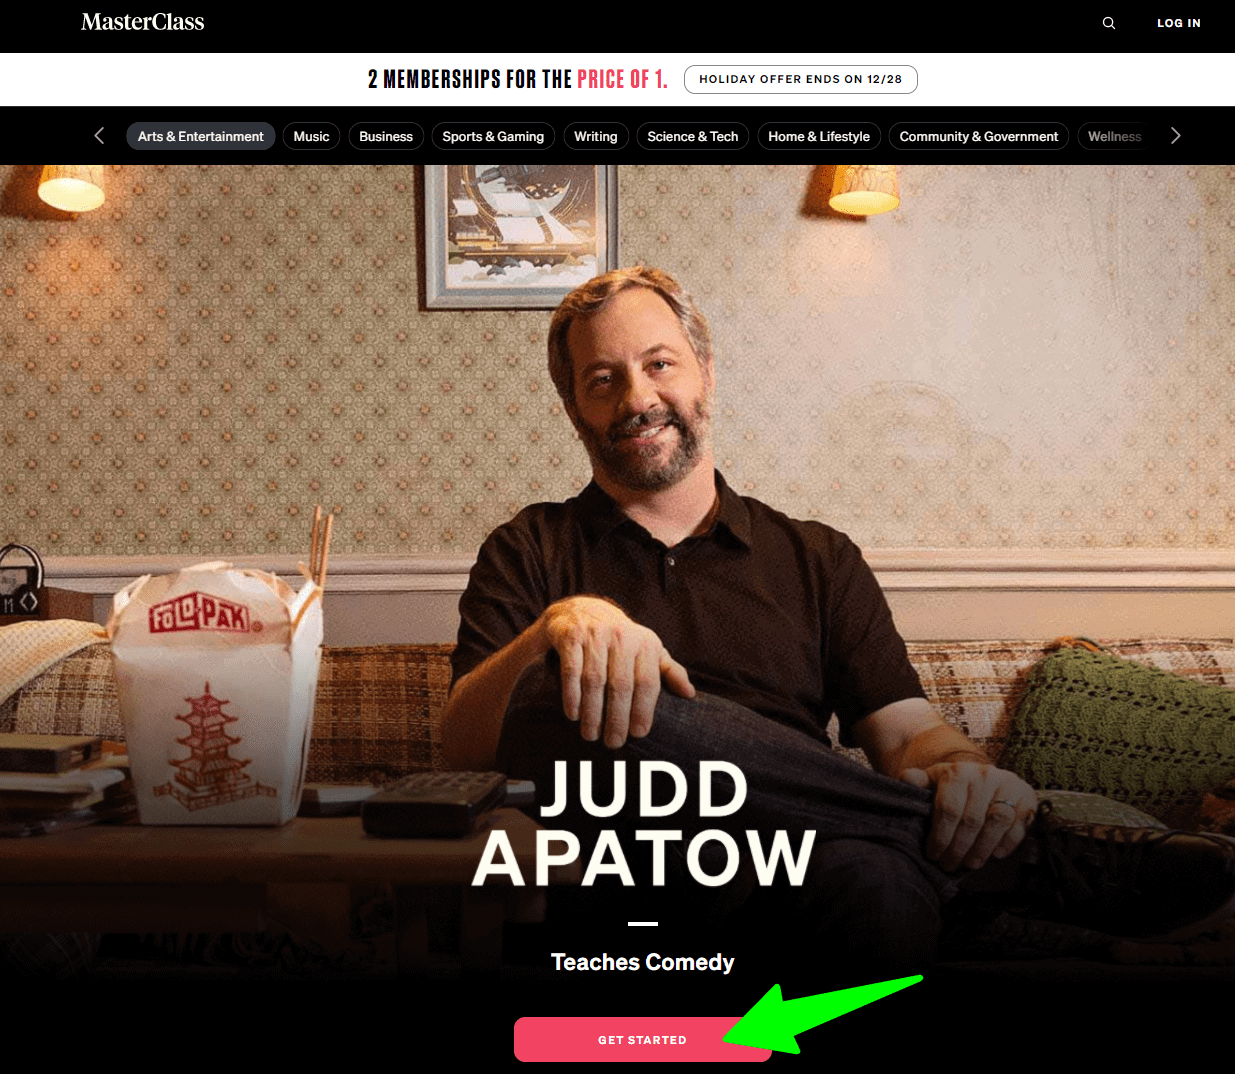 Judd Apatow Masterclass Review